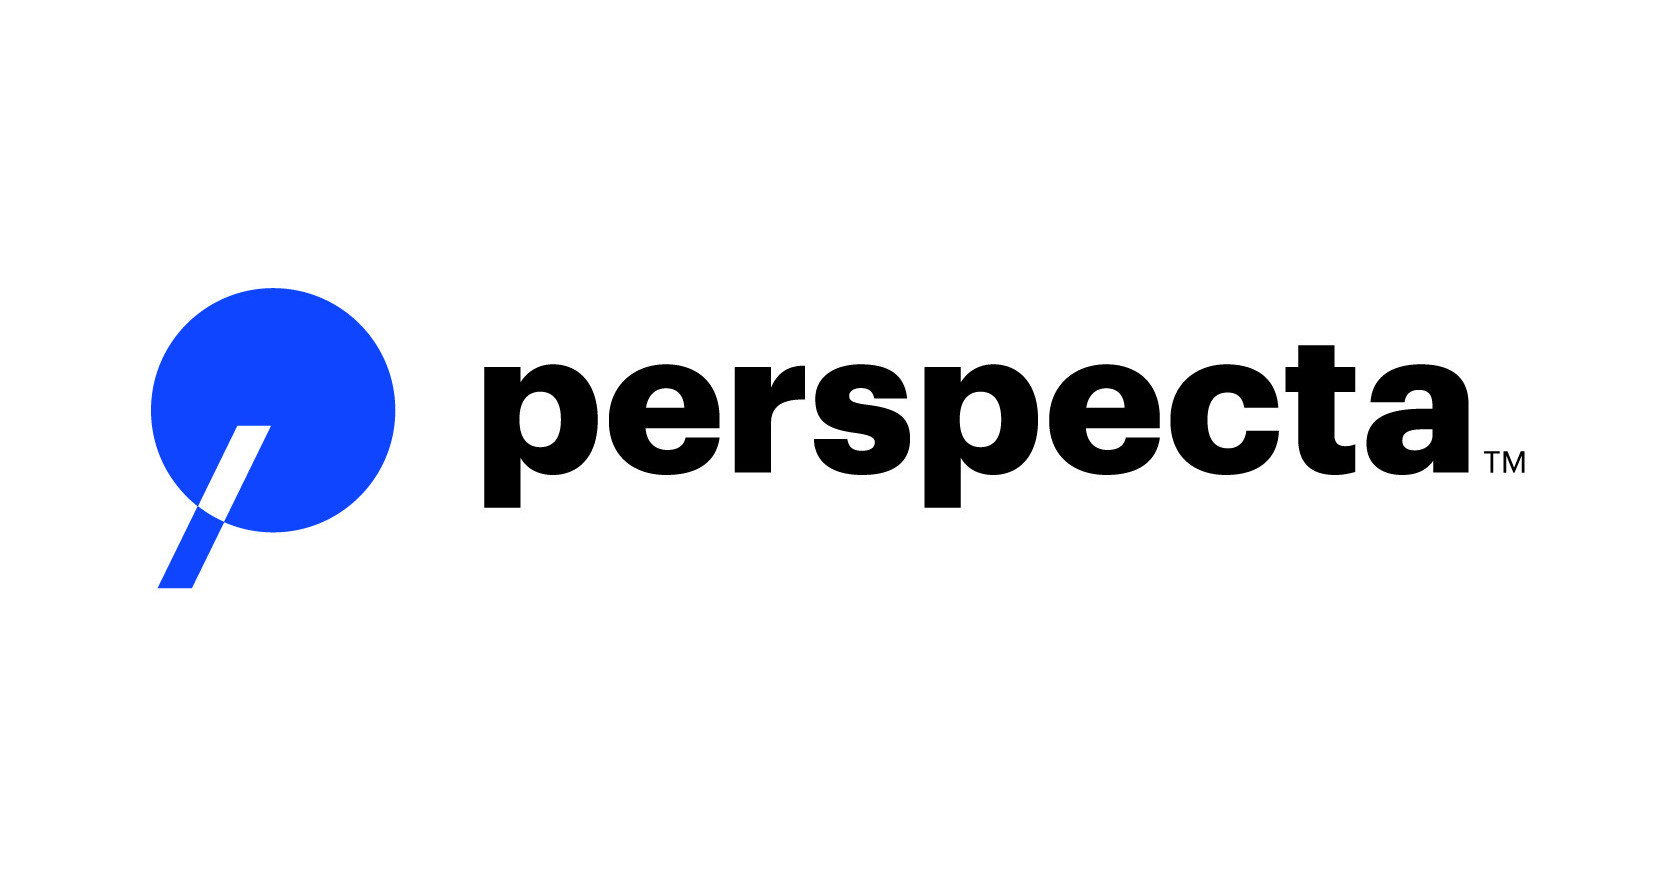 Perspecta announces financial results for third quarter of fiscal year 2021